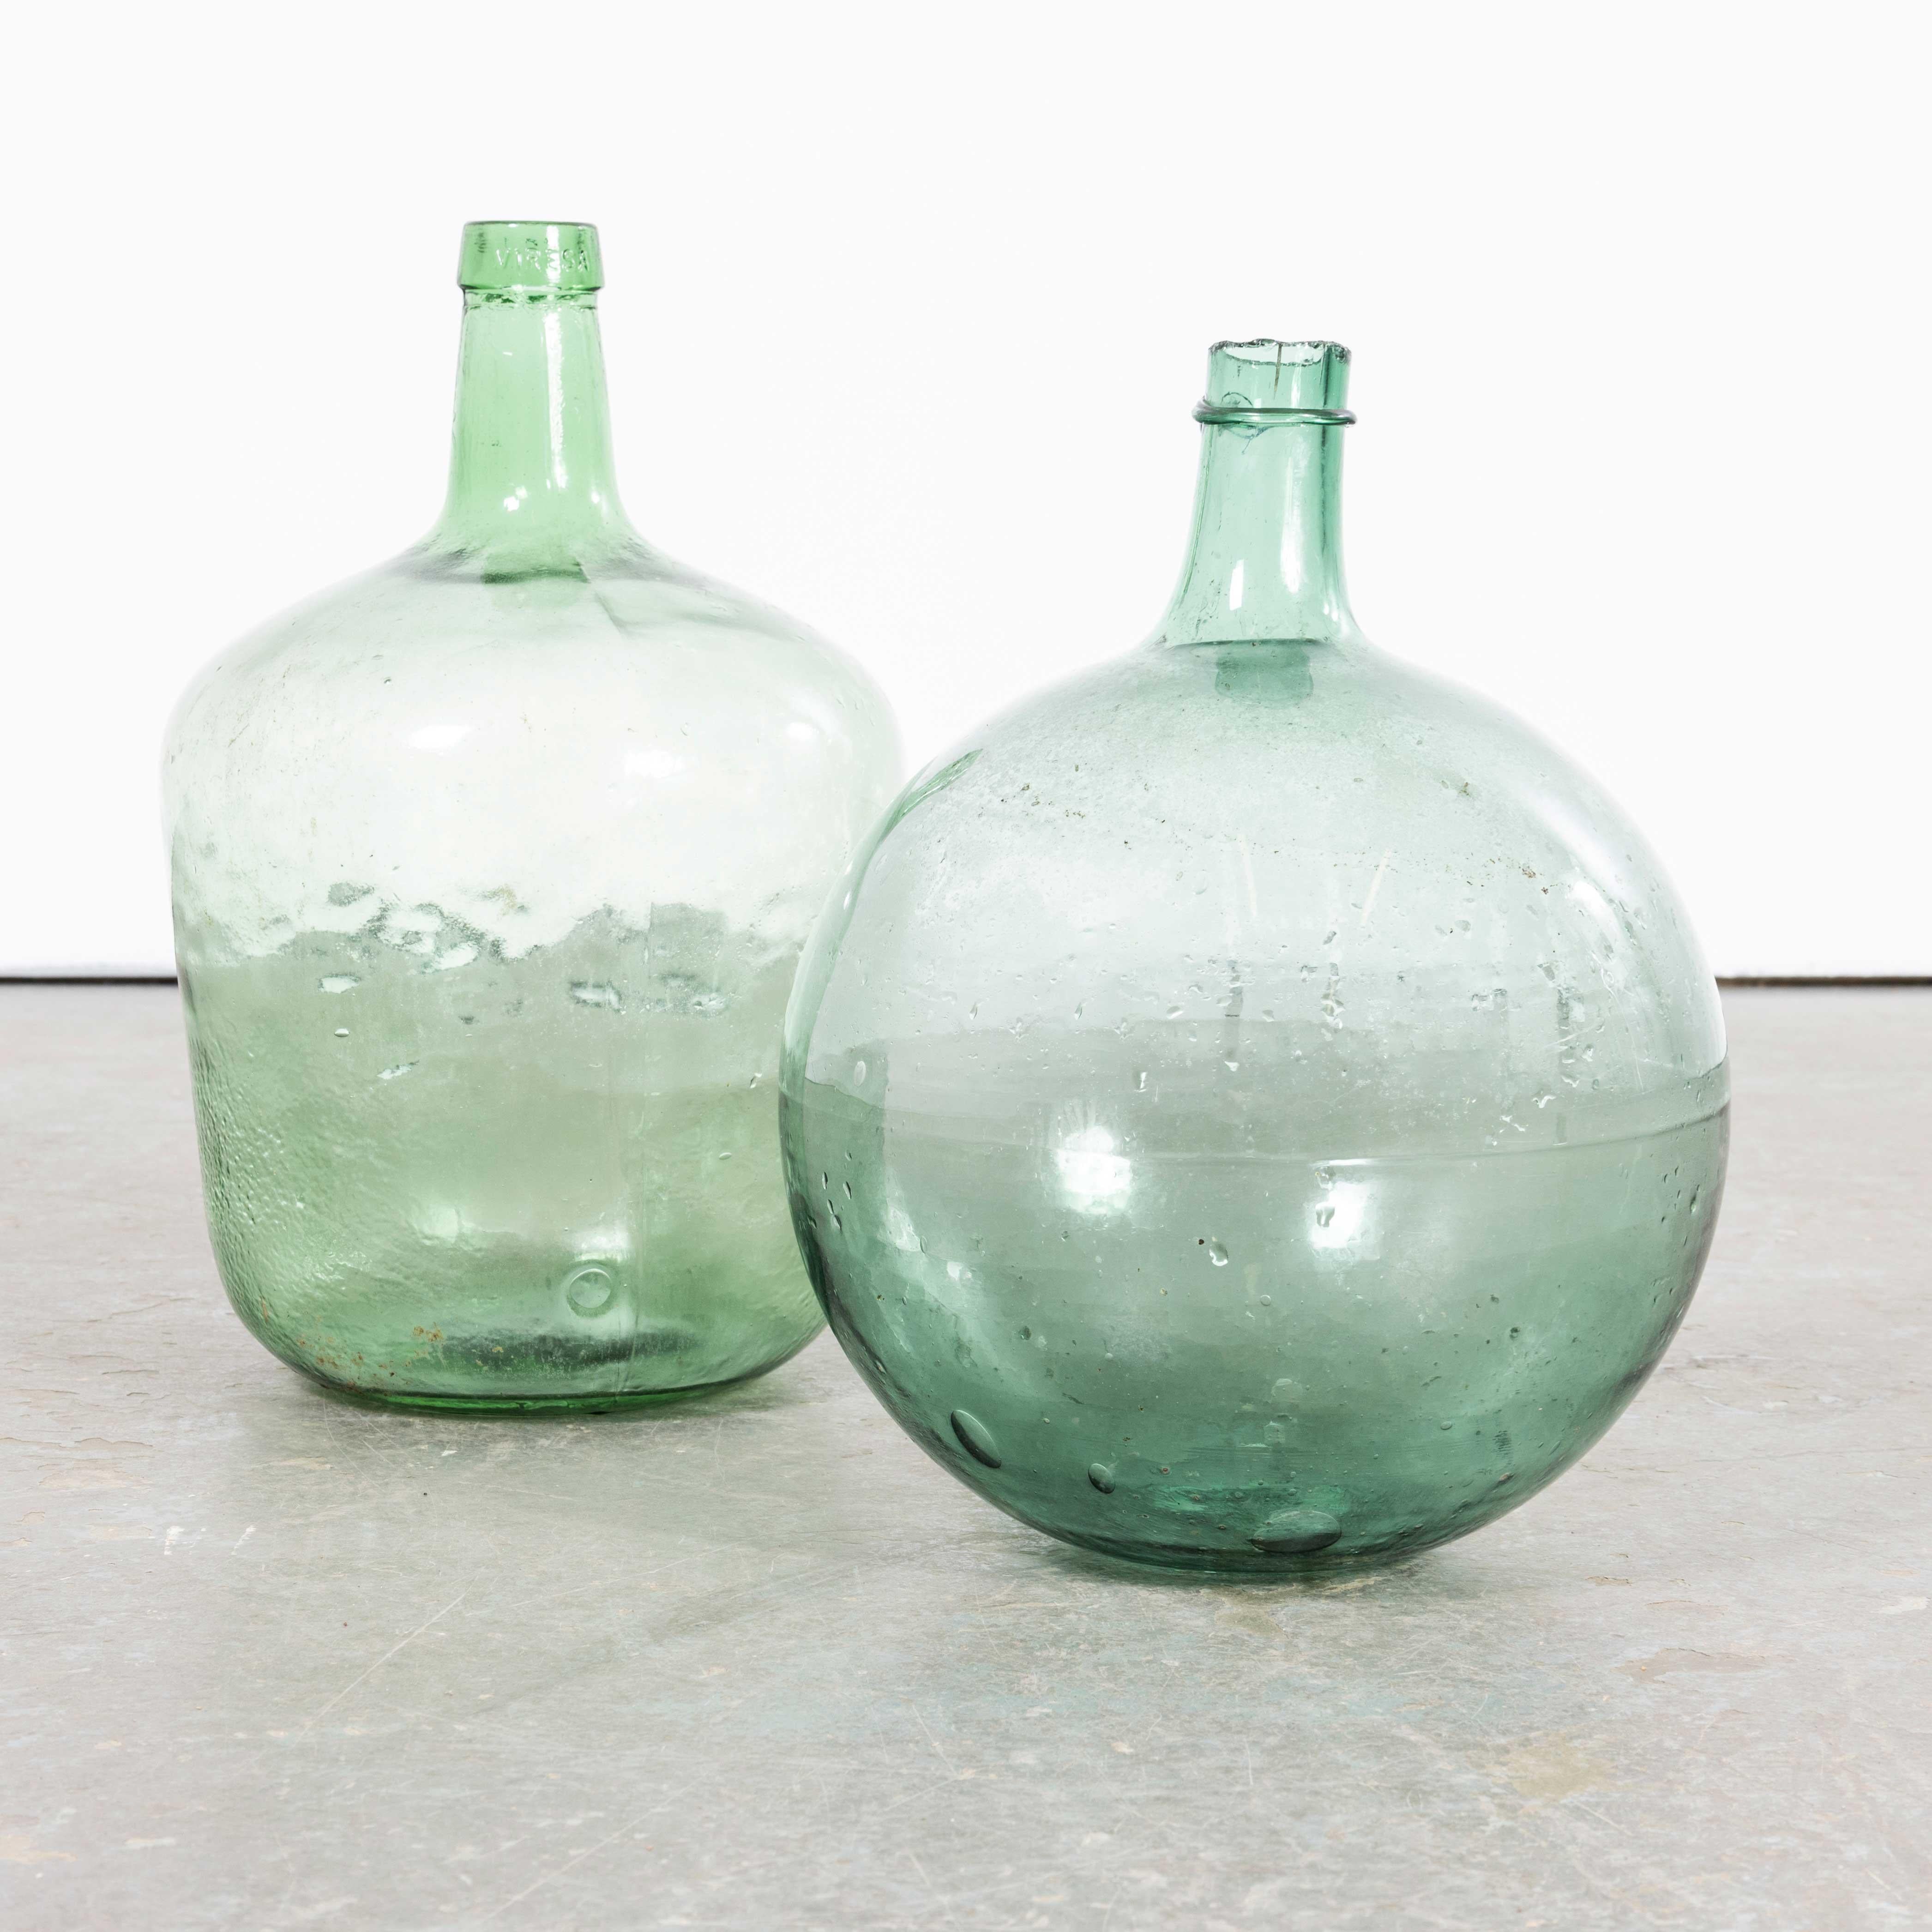 Vintage French Glass Demijohns - Pair (957.23) For Sale 1